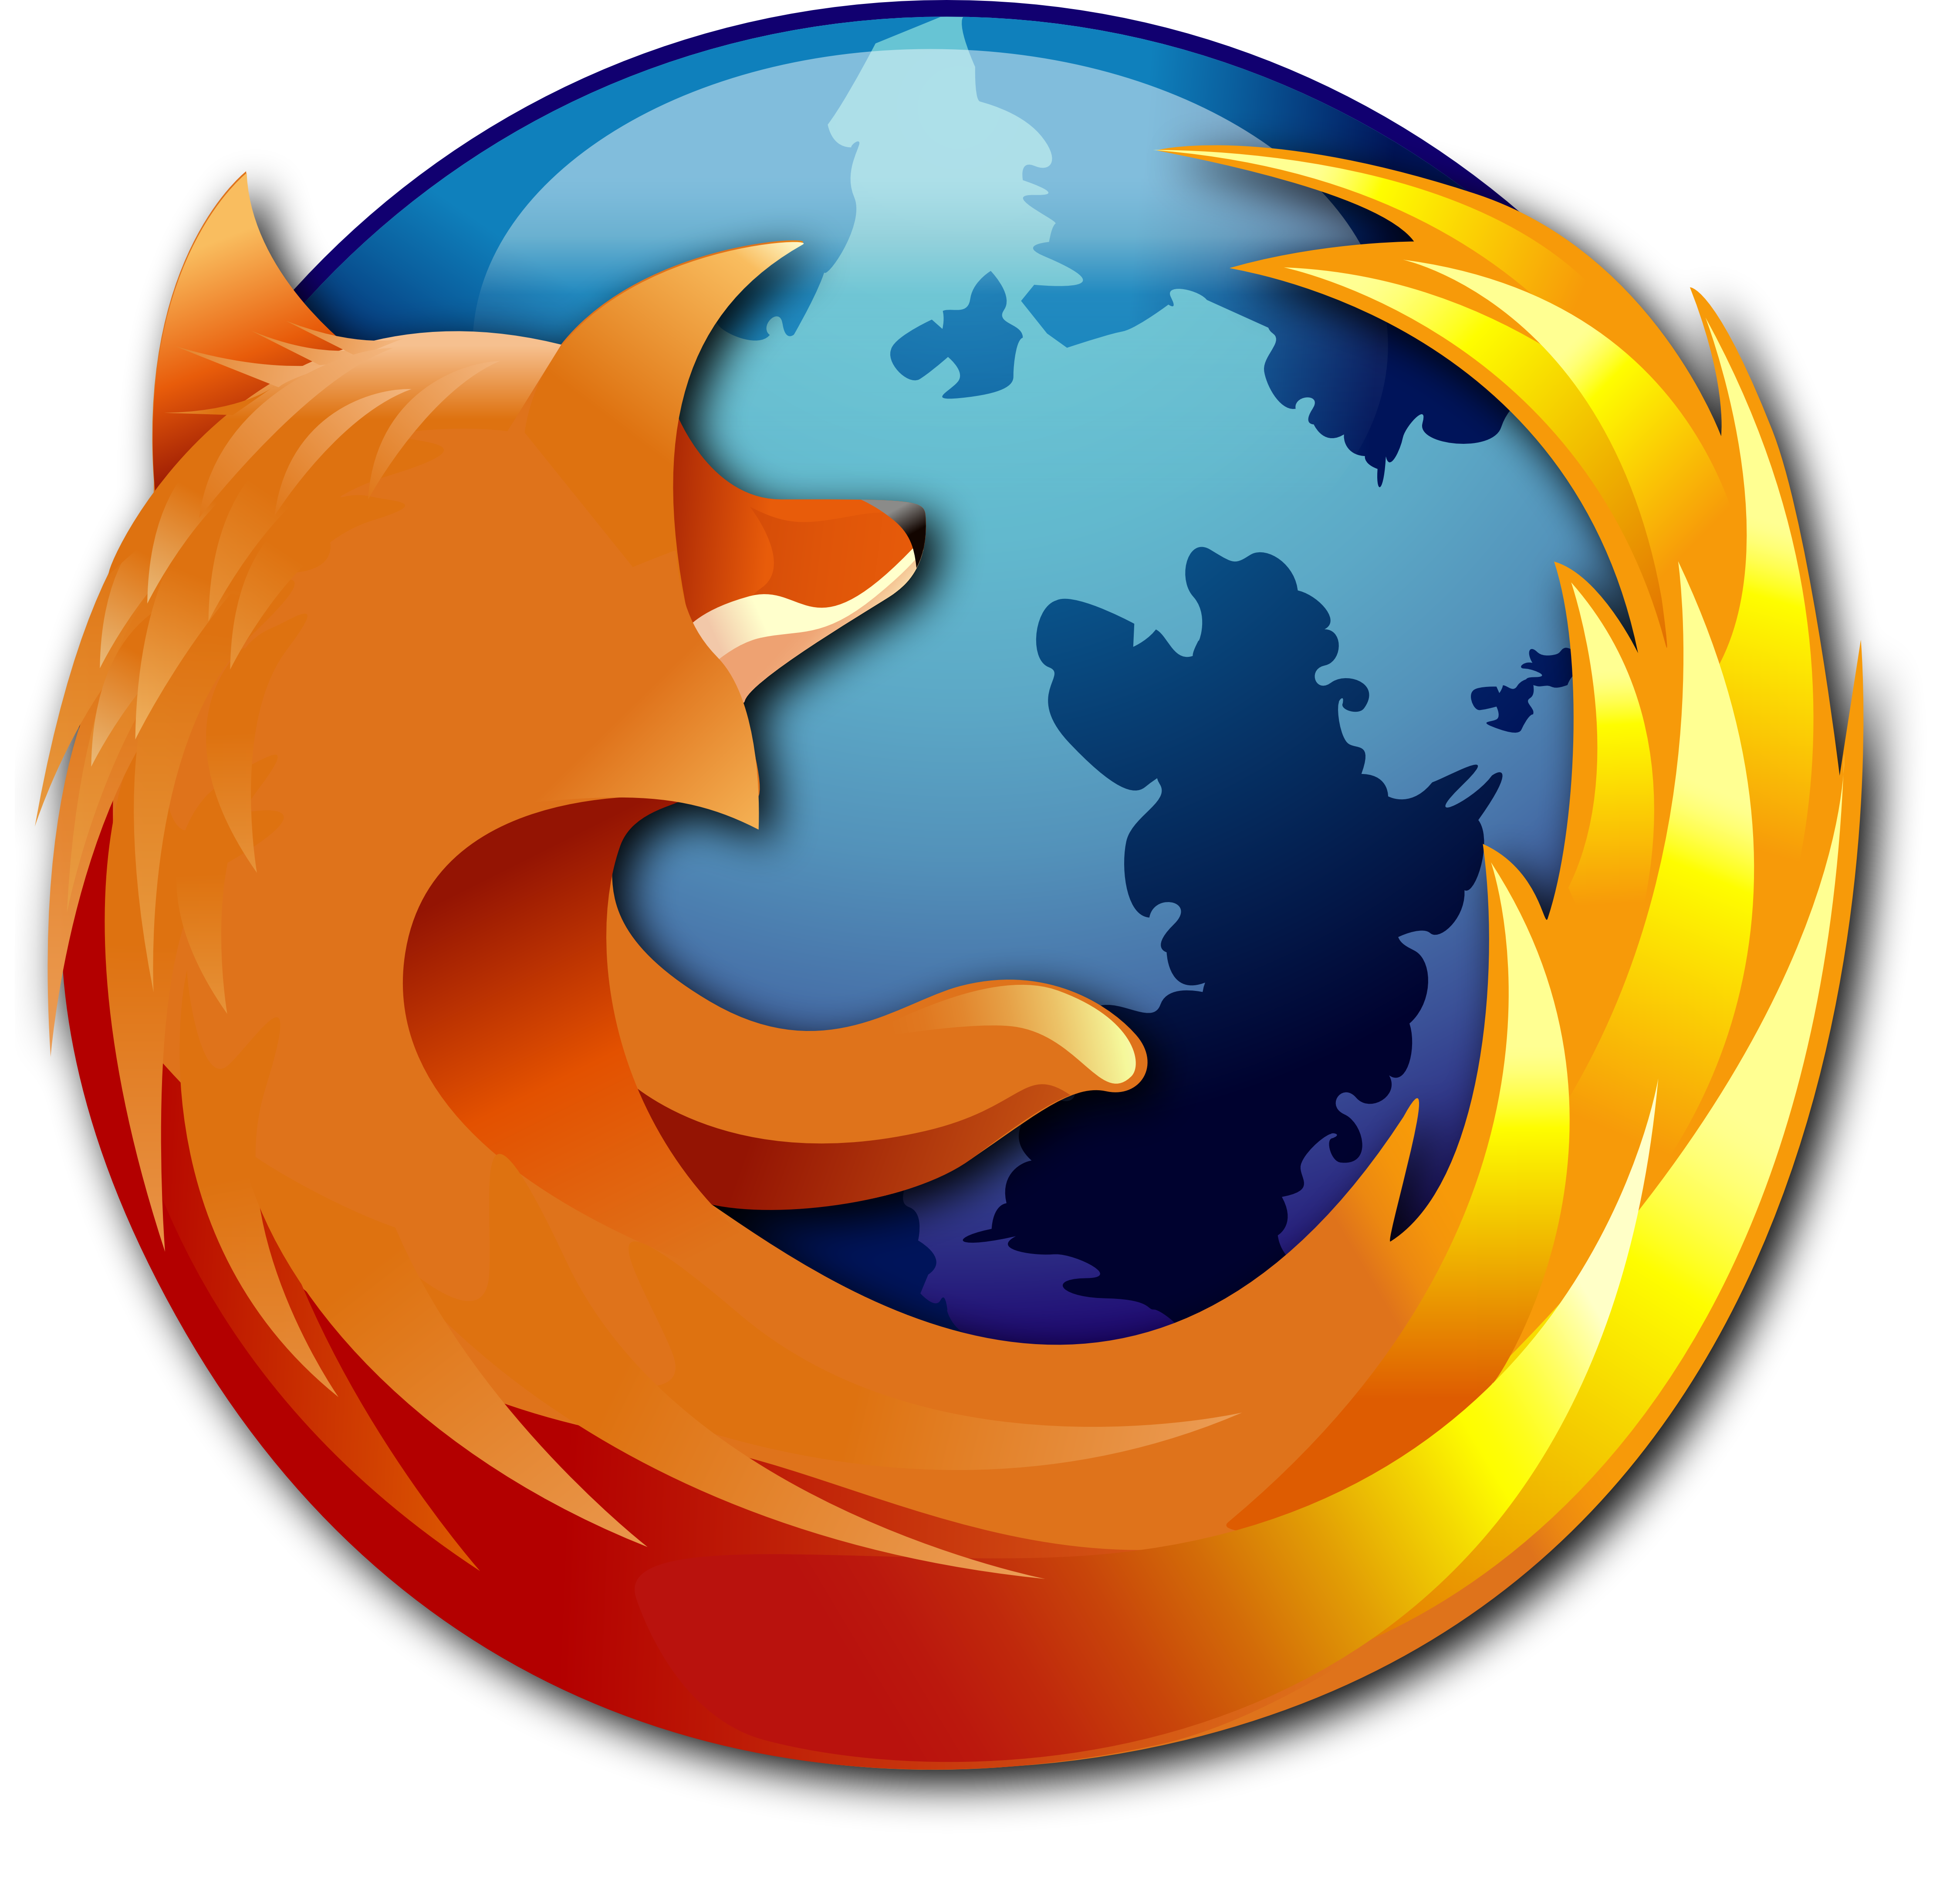 Mozilla Employees, Board Members and Developers Revolt After Brendan Eich Hire